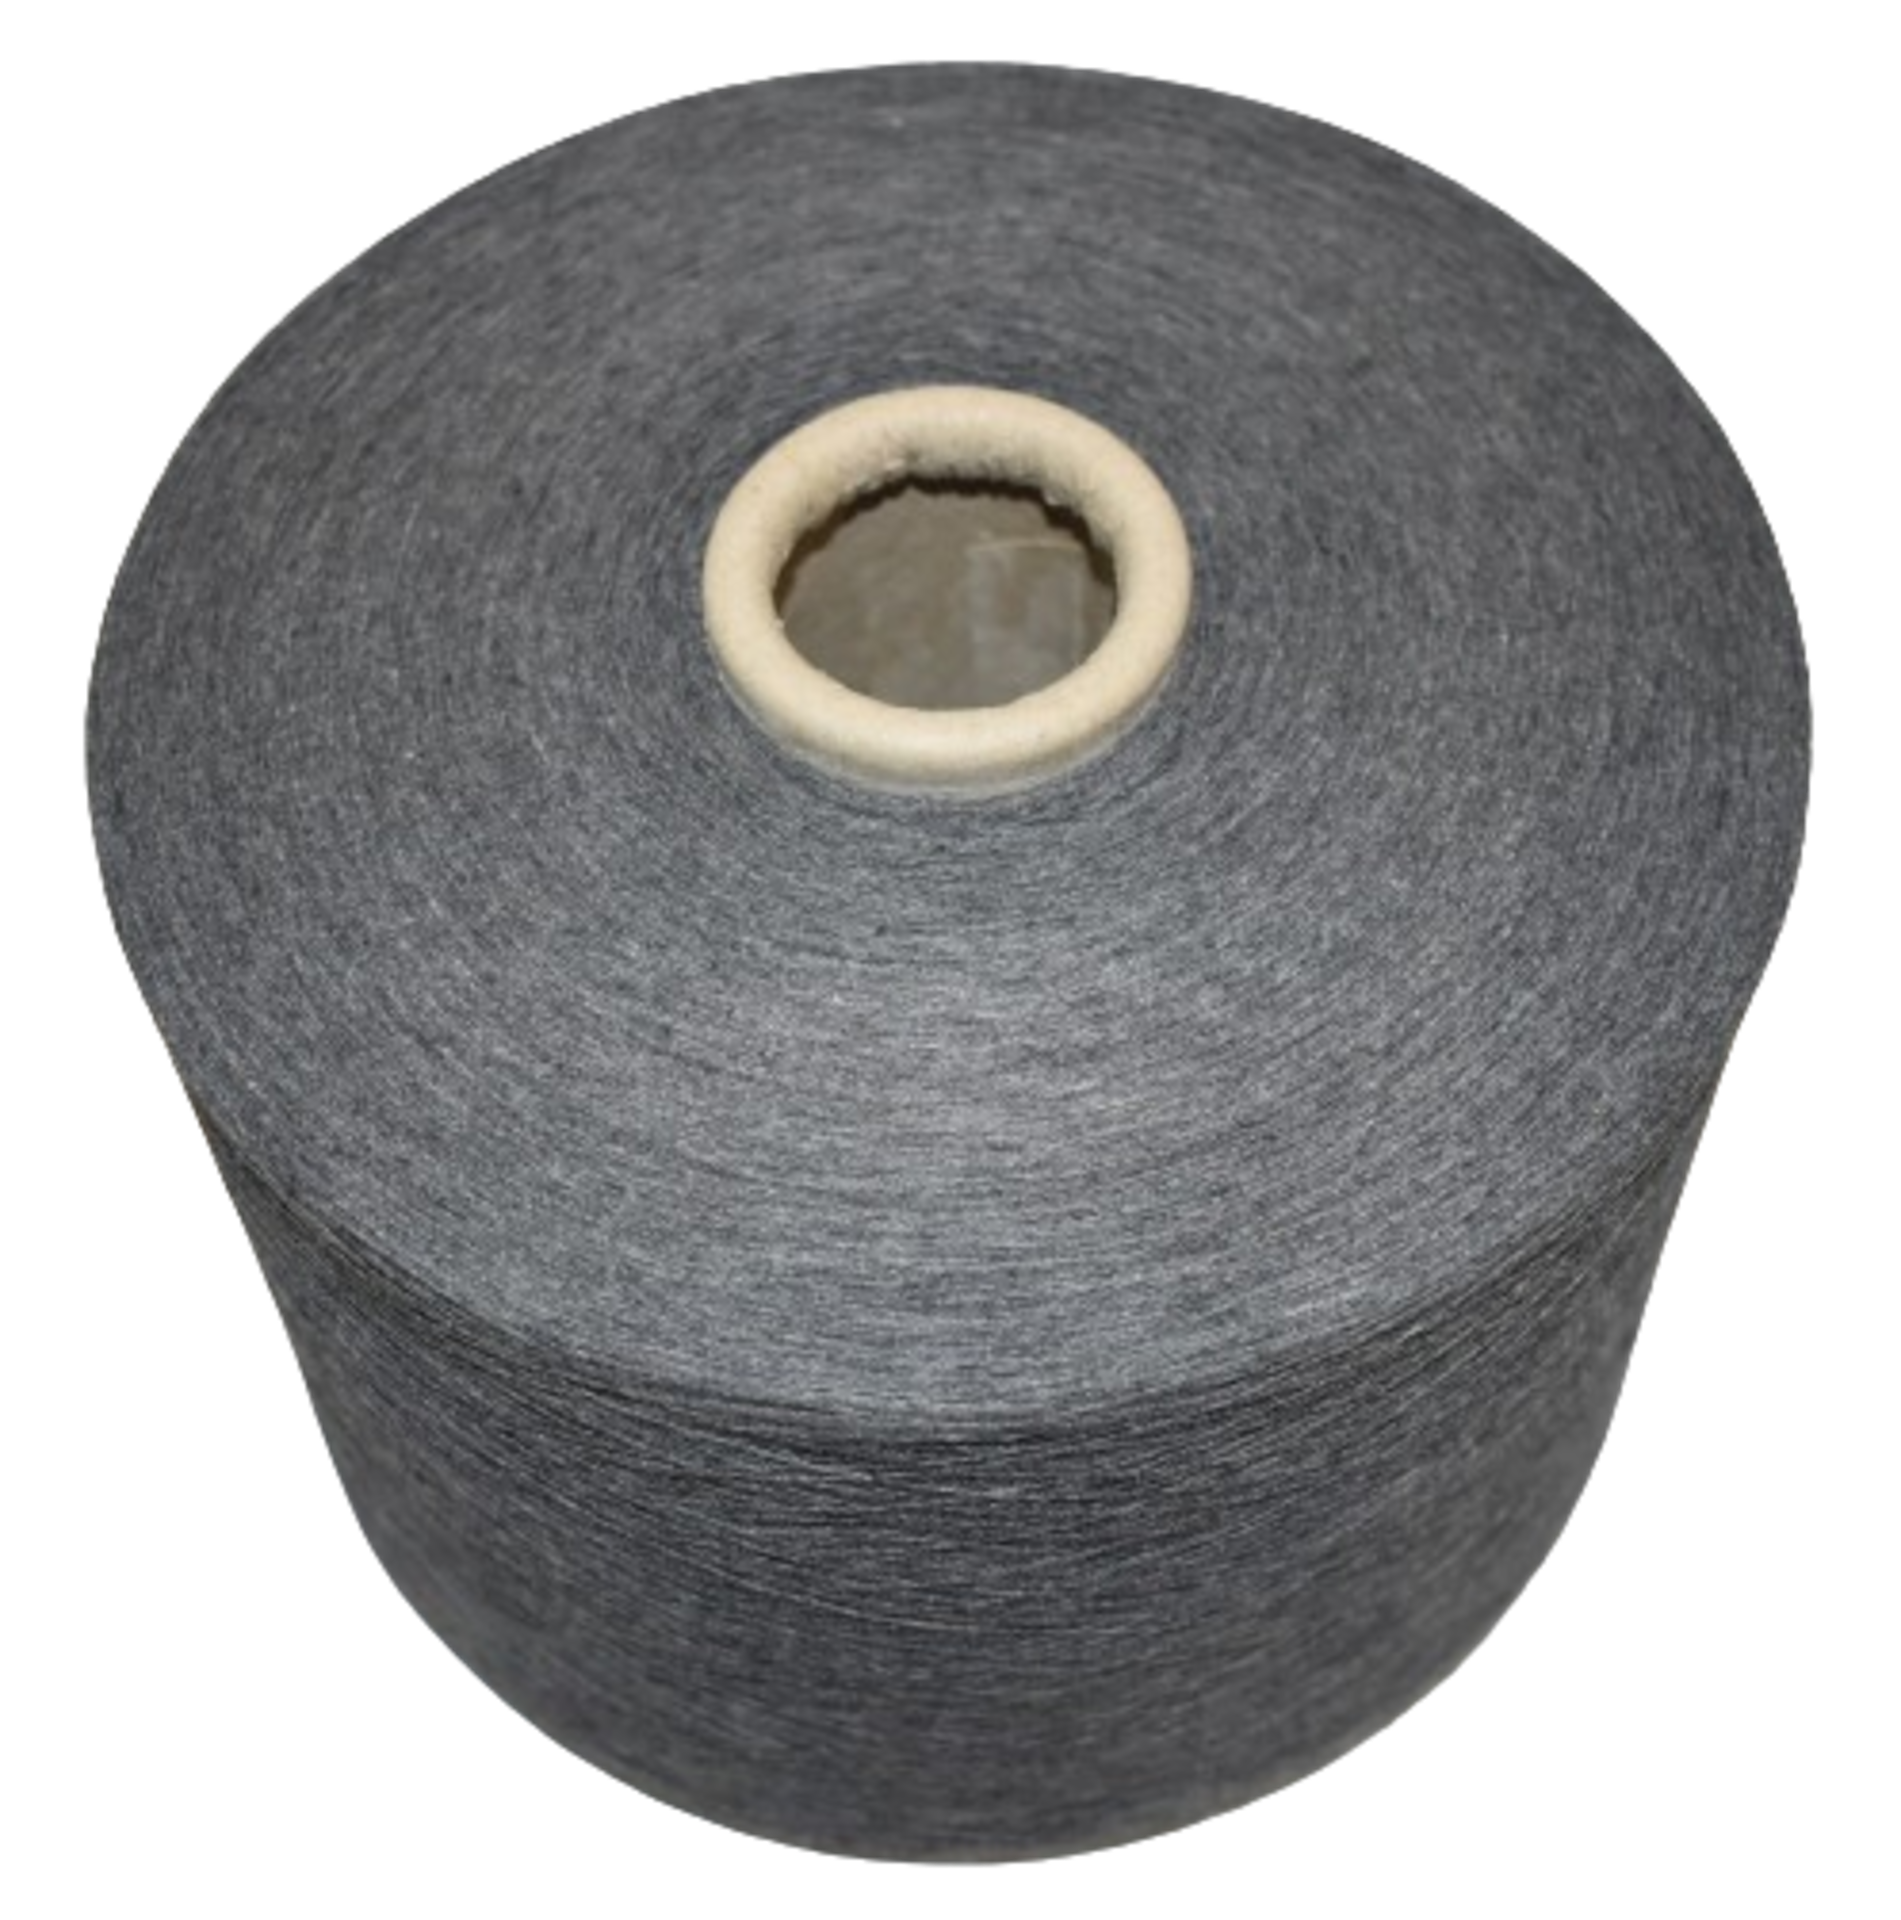 1 x Cone of 1/13 MicroCotton Knitting Yarn - Mid Grey - Approx Weight: 2,500g - New Stock ABL Yarn - Image 2 of 18